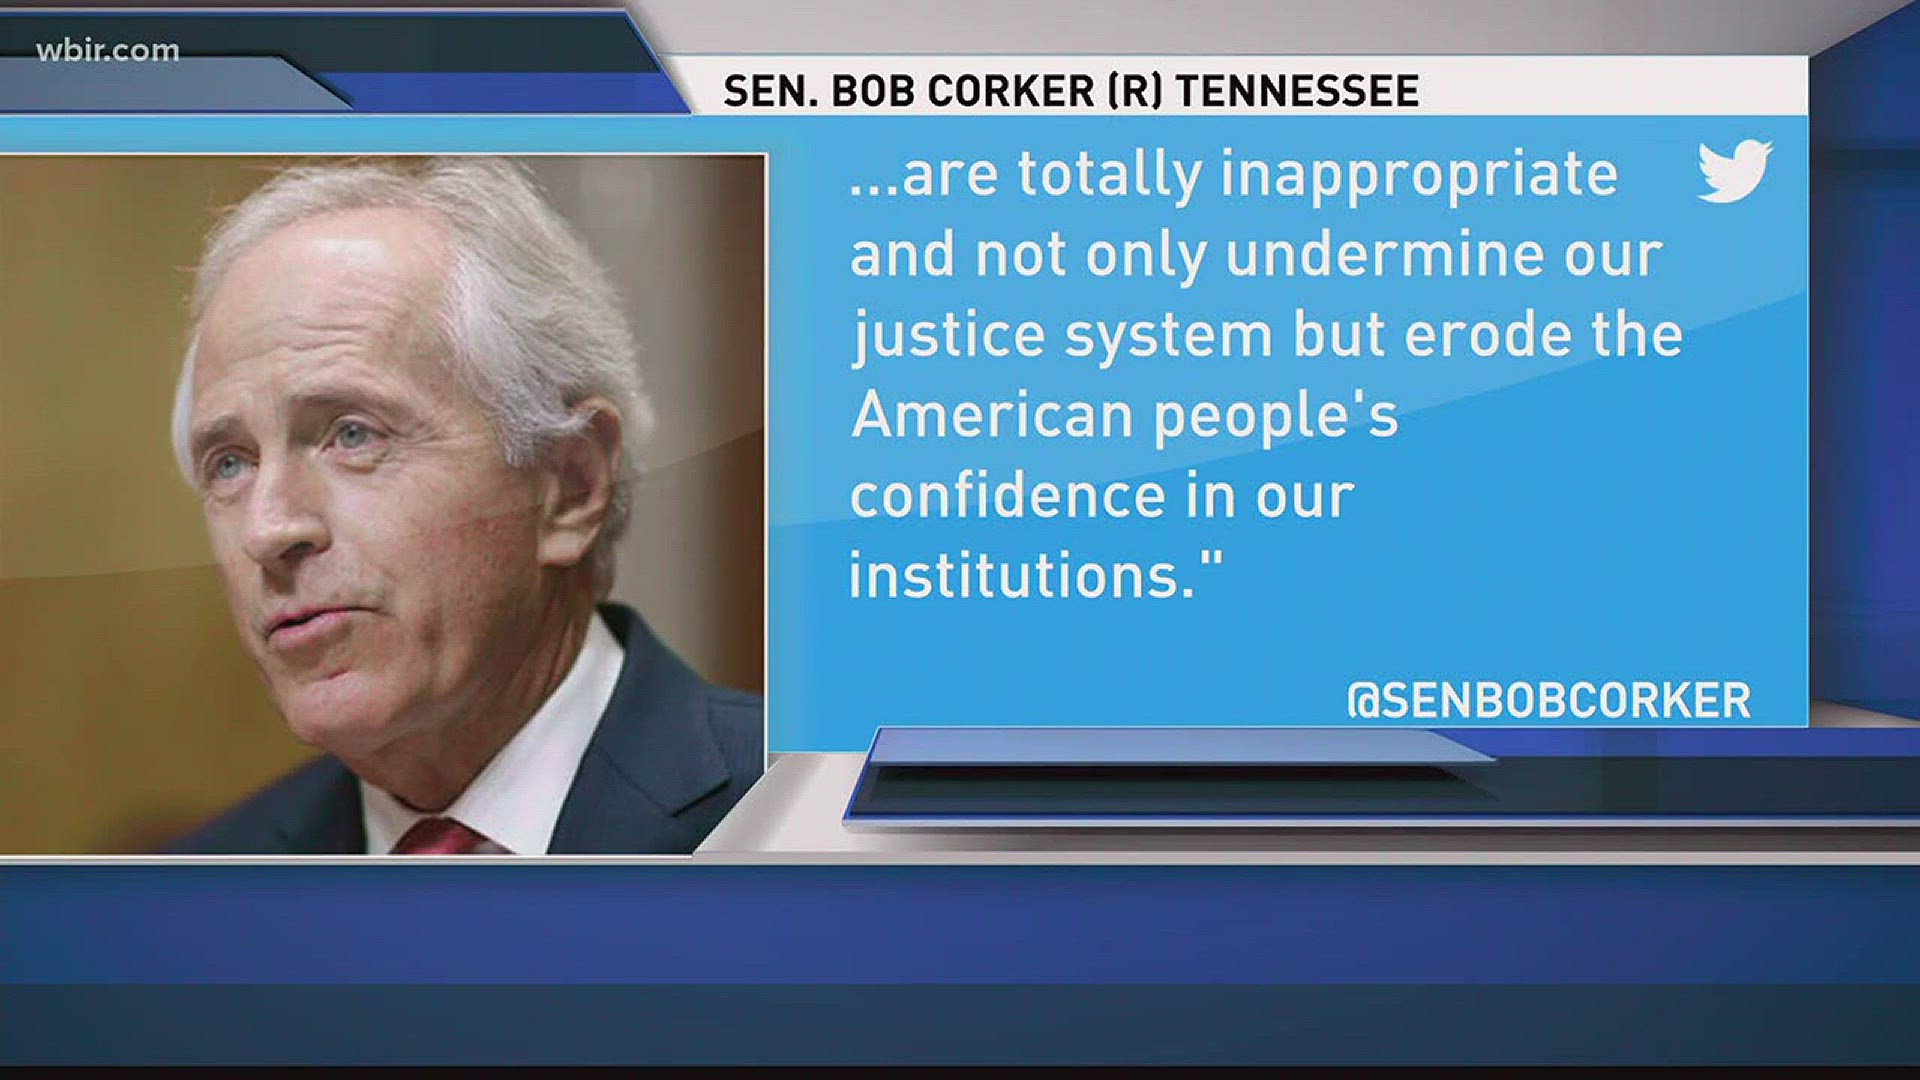 Nov. 3, 2017: Sen. Bob Corker once again taking aim again at the president on Twitter. This time about his stance on the Justice Department.